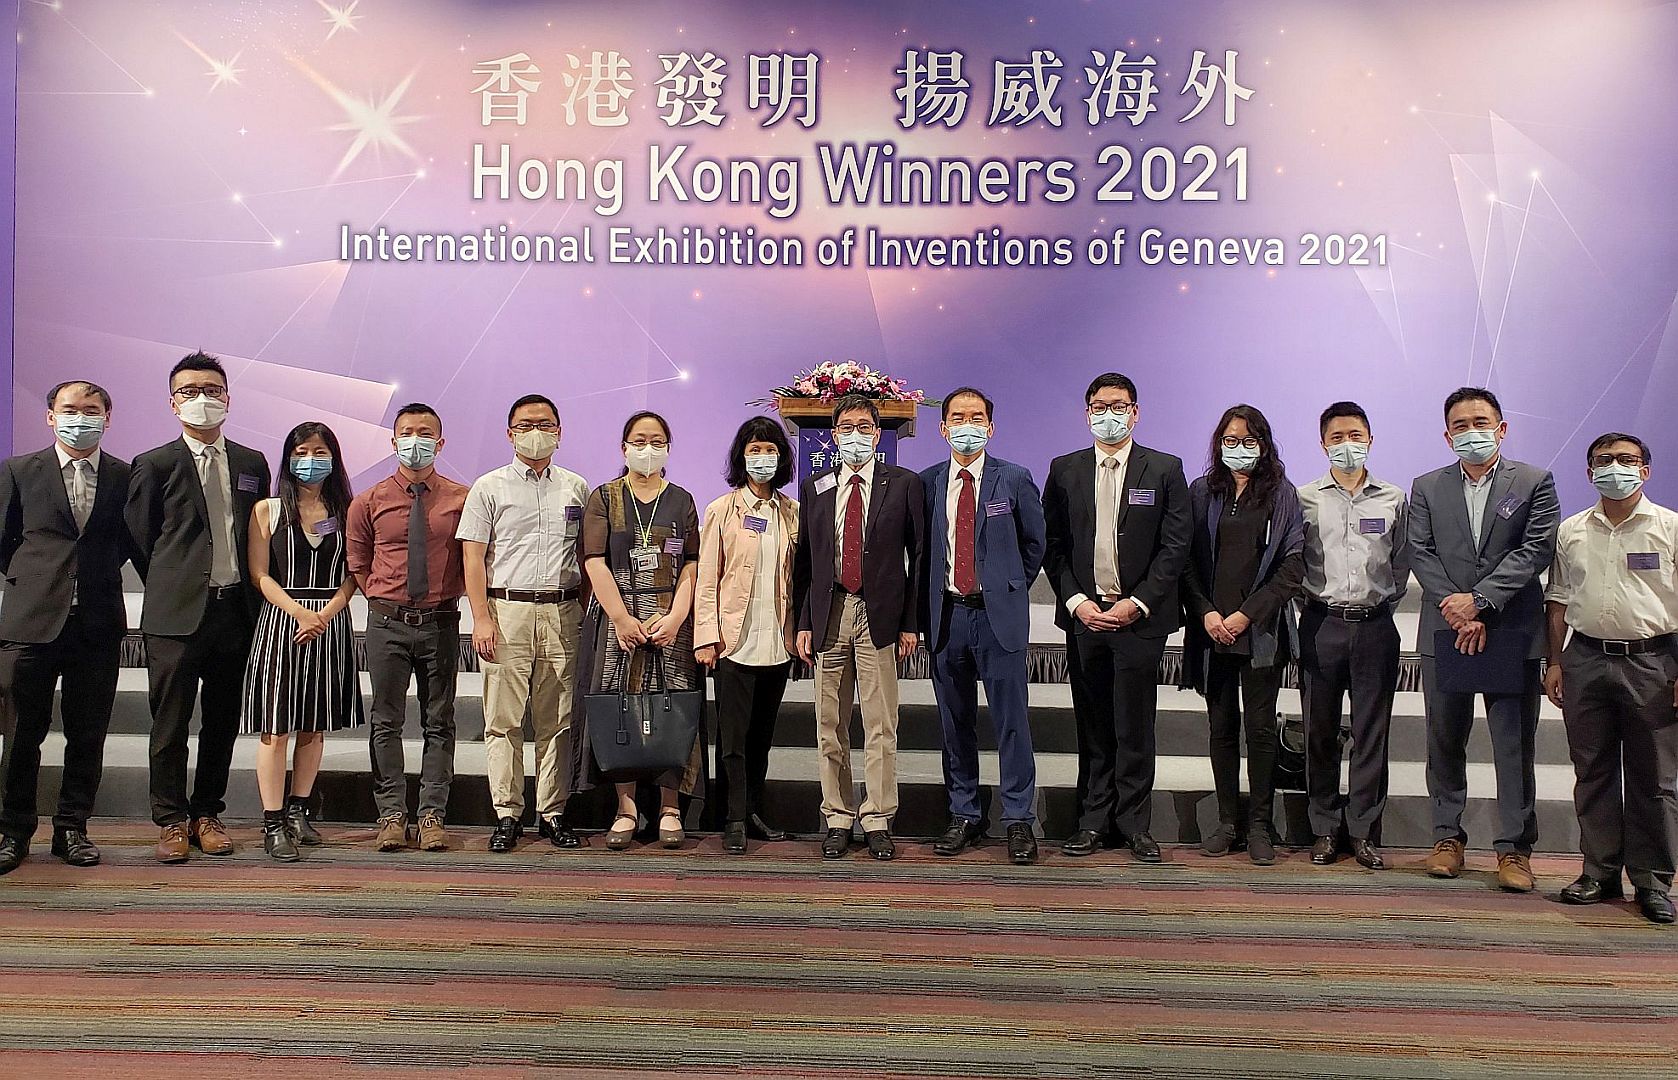 Powered by AI and IoT, the AI Motion-developed “Youth Sports Education and Management SaaS platform” won the Gold Medal at the virtual edition of International Exhibition of Inventions of Geneva 2021. Professor Way Kuo, CityU President (eighth from left); Professor Michael Yang Mengsu, Vice President (Research and Technology) (ninth from left); and the CityU winners attended a special reception, officiated by Chief Executive Mrs Carrie Lam Cheng Yuet-ngor. Professor Li Wen Jung (second from right), Wang Yufan's PhD supervisor, attended the ceremony on his behalf.